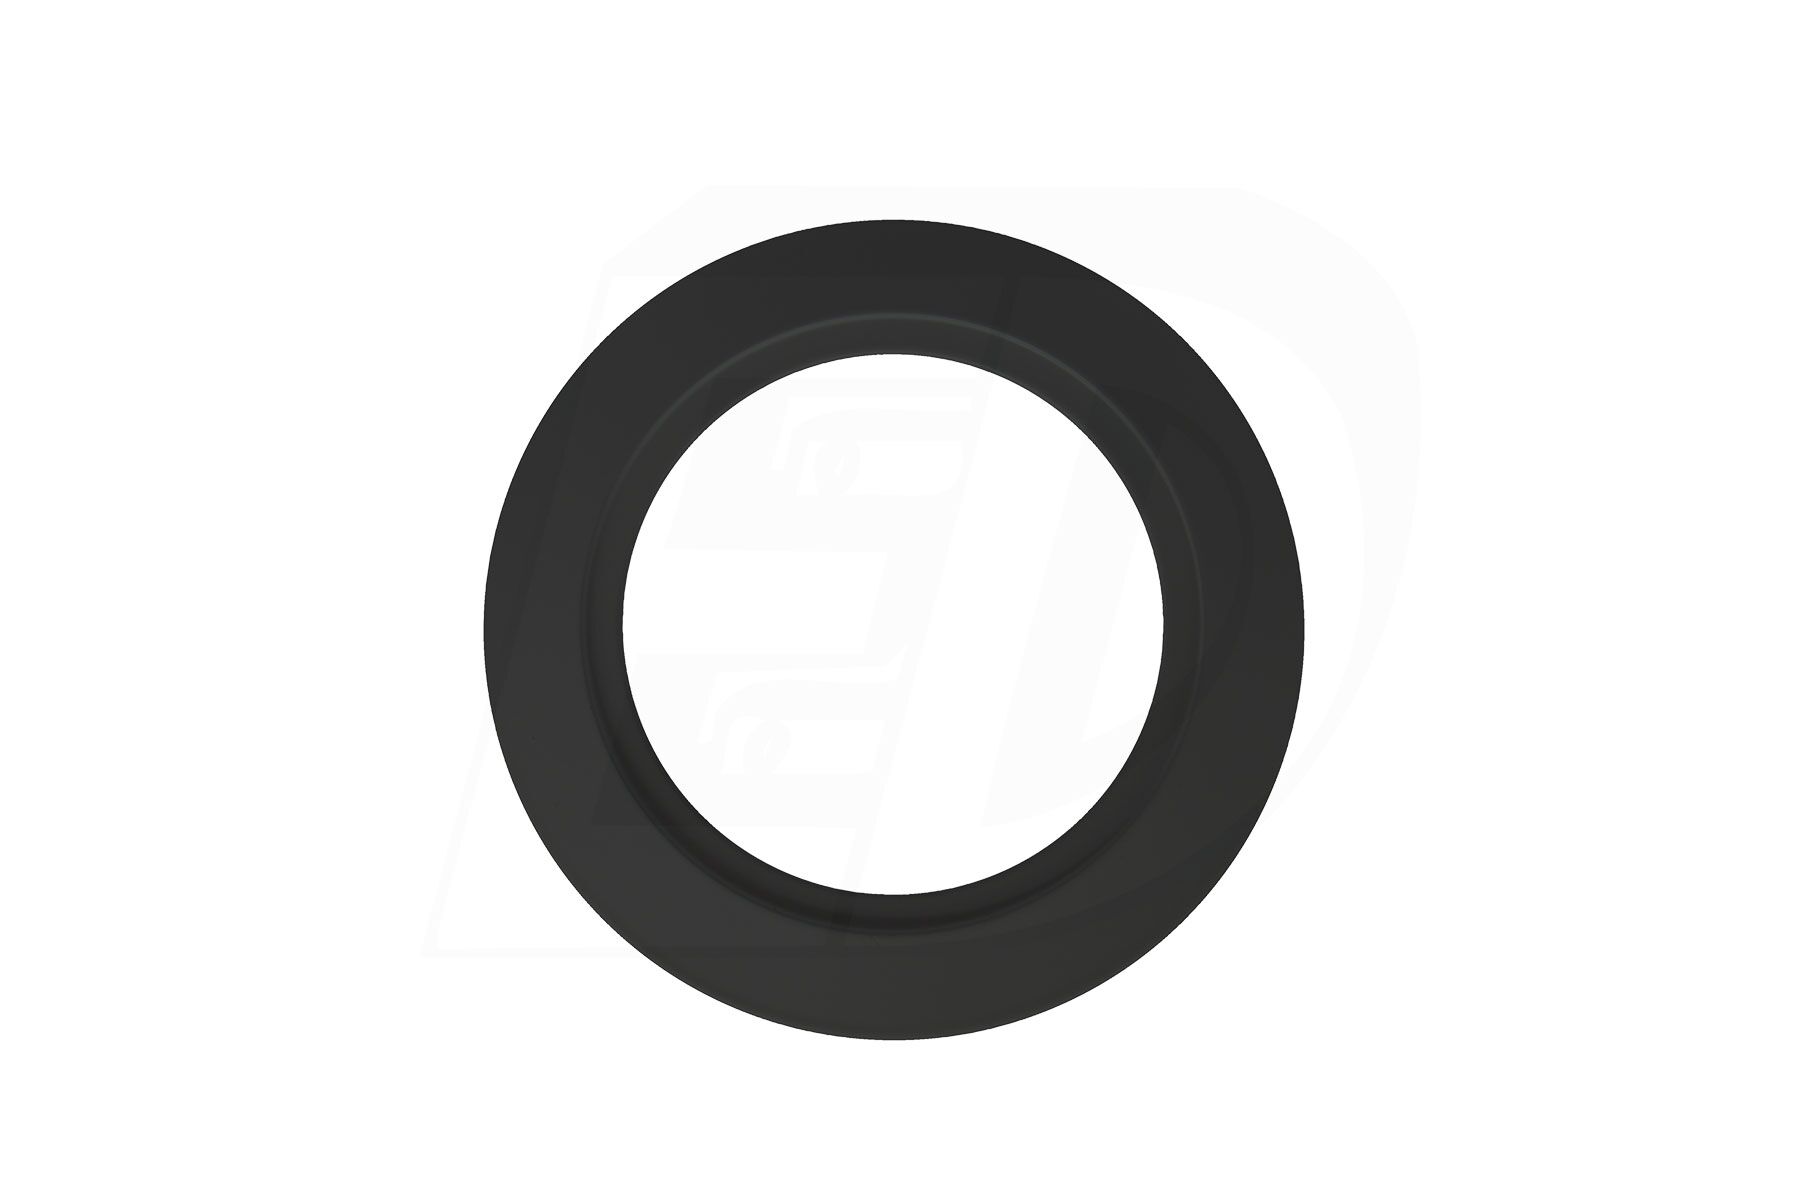 Black Goof Ring Overall Diameter 4 1/2" for DLSGR 3 Inch. Round Integrated LED Gimbal Recessed Light